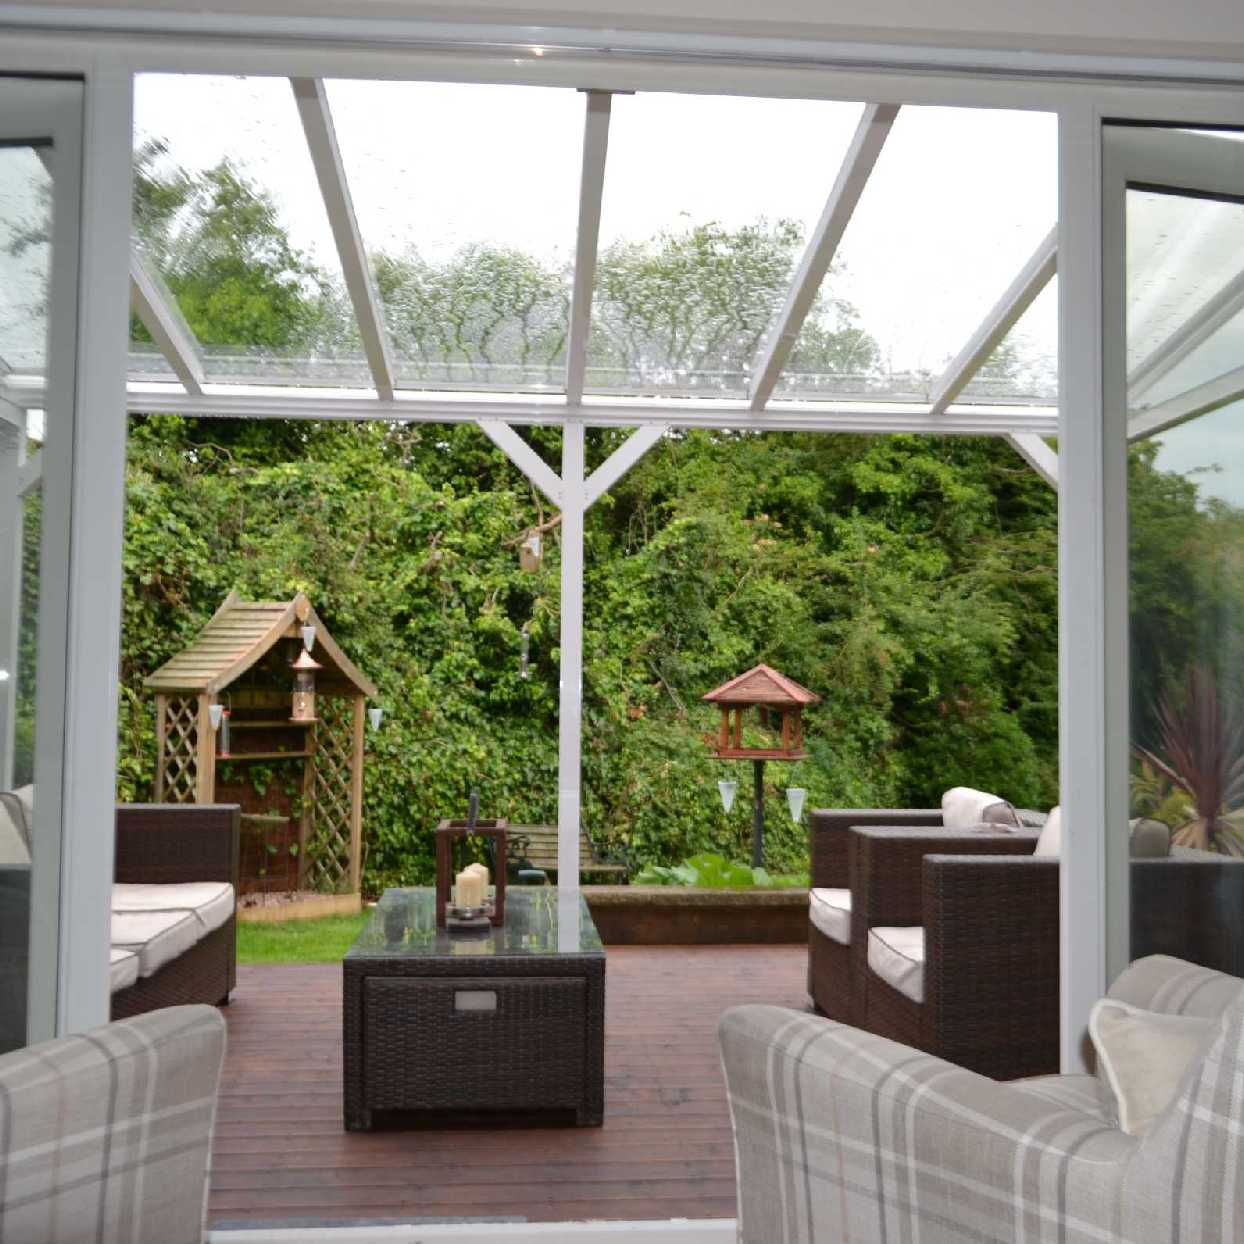 Buy Omega Smart Free-Standing, White MonoPitch Roof Canopy with 6mm Glass Clear Plate Polycarbonate Glazing - 2.1m (W) x 2.0m (P), (4) Supporting Posts online today